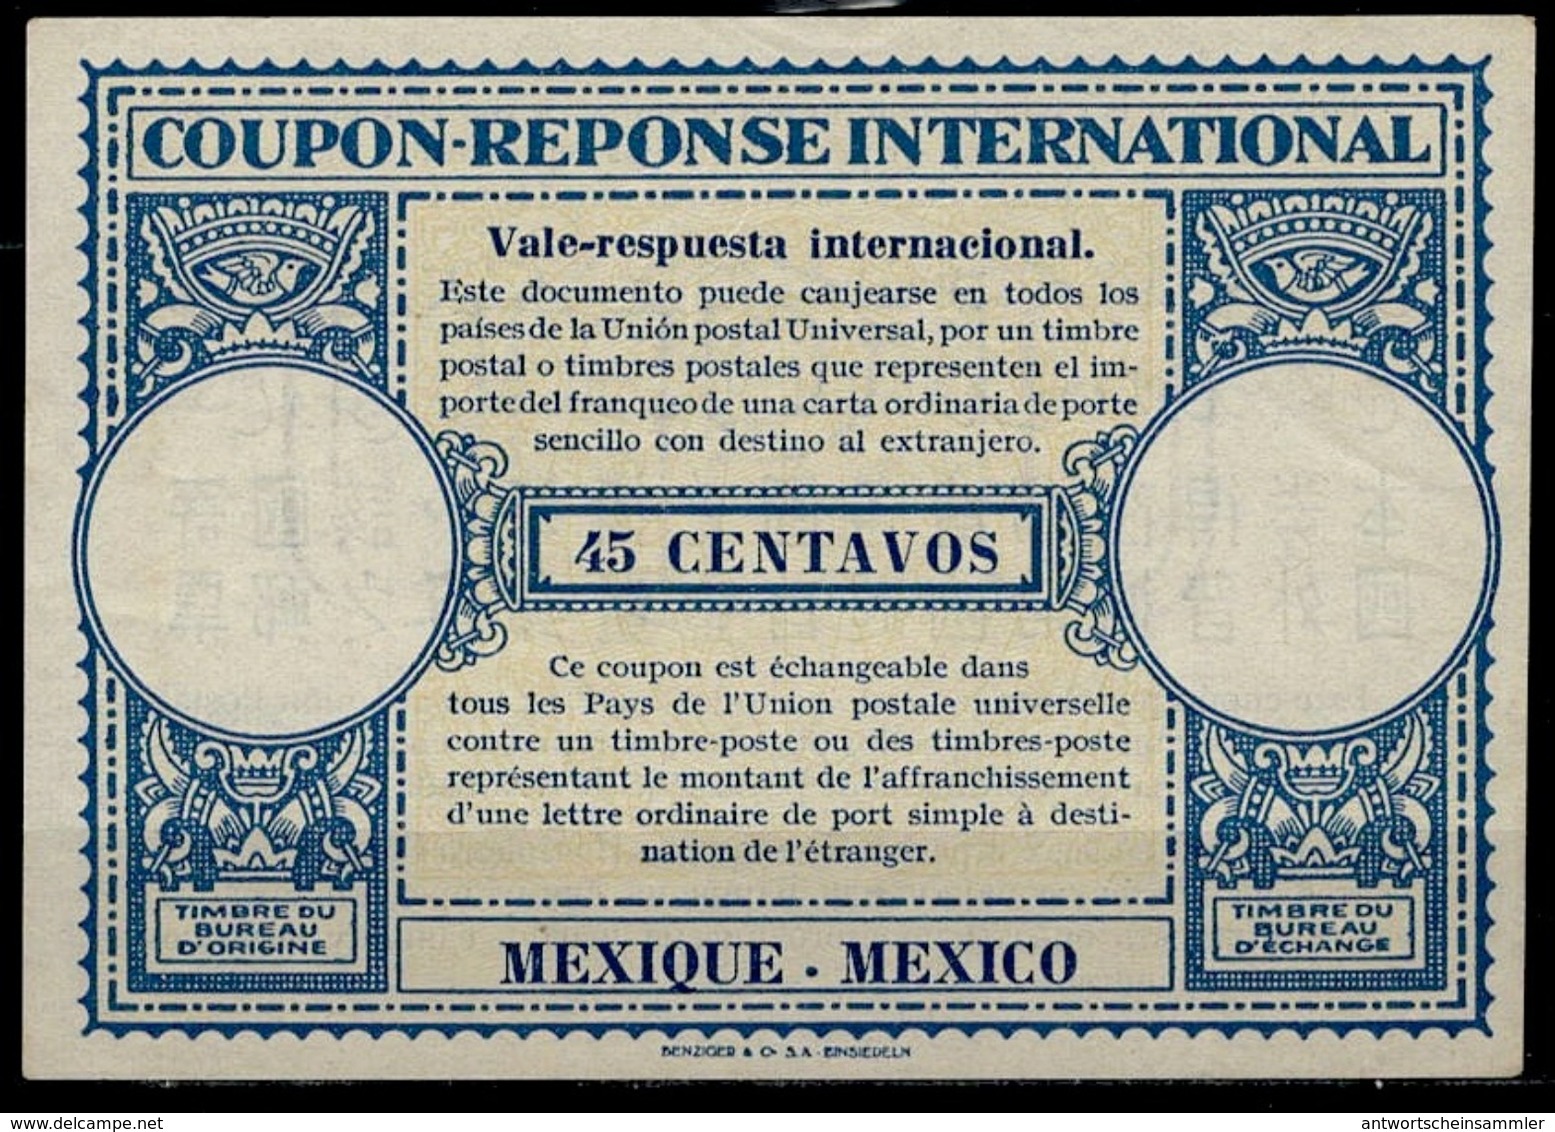 MEXICO / MEXIQUE Ca 1948, London Type XVr 45 CENTAVOS International Reply Coupon Reponse Antwortschein IAS IRC Mint ** - Mexique